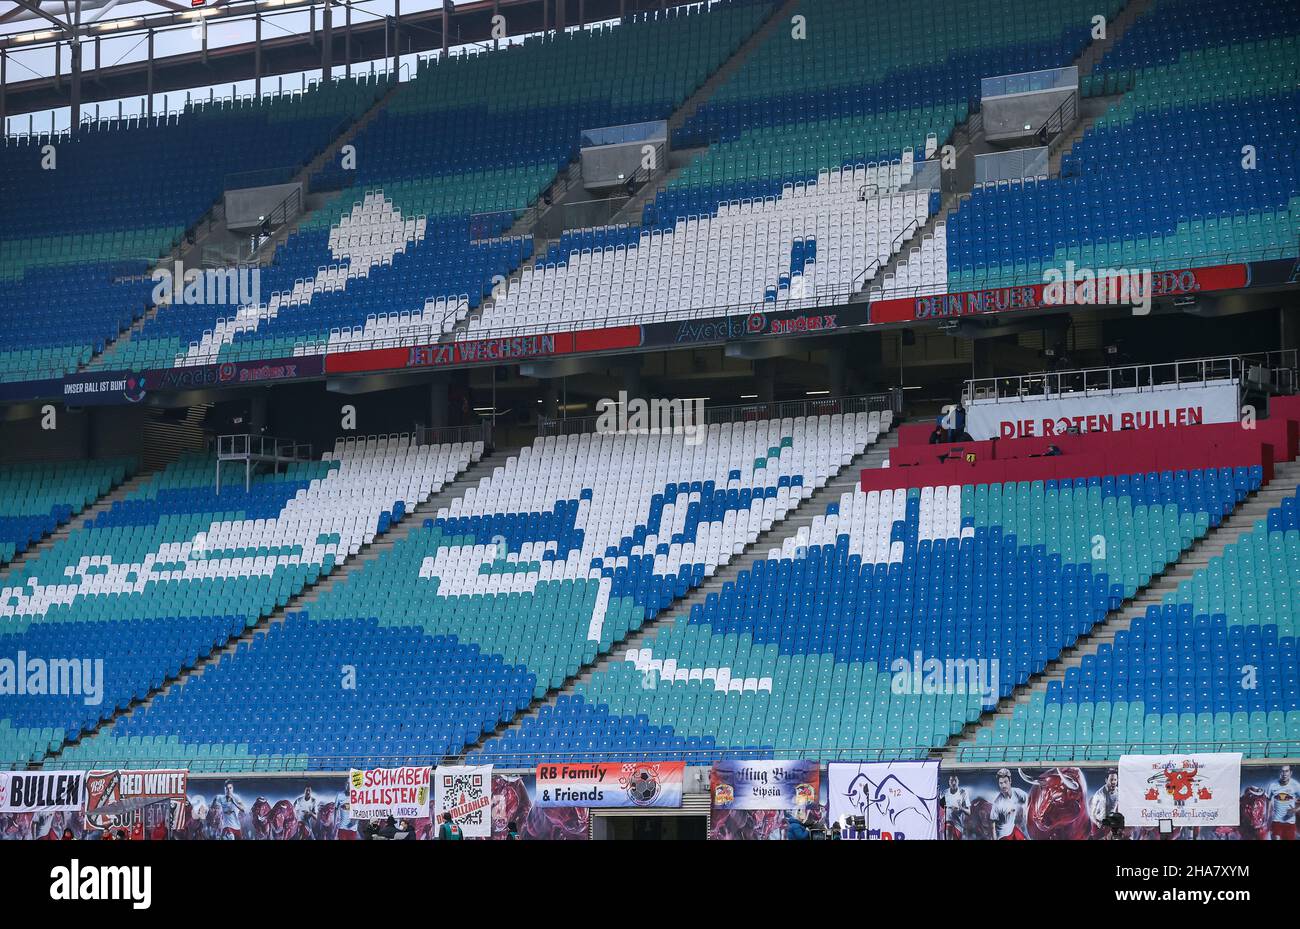 Leipzig, Germany. 11th Dec, 2021. Football: Bundesliga, Matchday 15, RB Leipzig - Borussia Mönchengladbach at the Red Bull Arena. A stylised bull made of coloured seat shells can be seen in the empty stands. Credit: Jan Woitas/dpa-Zentralbild/dpa - IMPORTANT NOTE: In accordance with the regulations of the DFL Deutsche Fußball Liga and/or the DFB Deutscher Fußball-Bund, it is prohibited to use or have used photographs taken in the stadium and/or of the match in the form of sequence pictures and/or video-like photo series./dpa/Alamy Live News Stock Photo